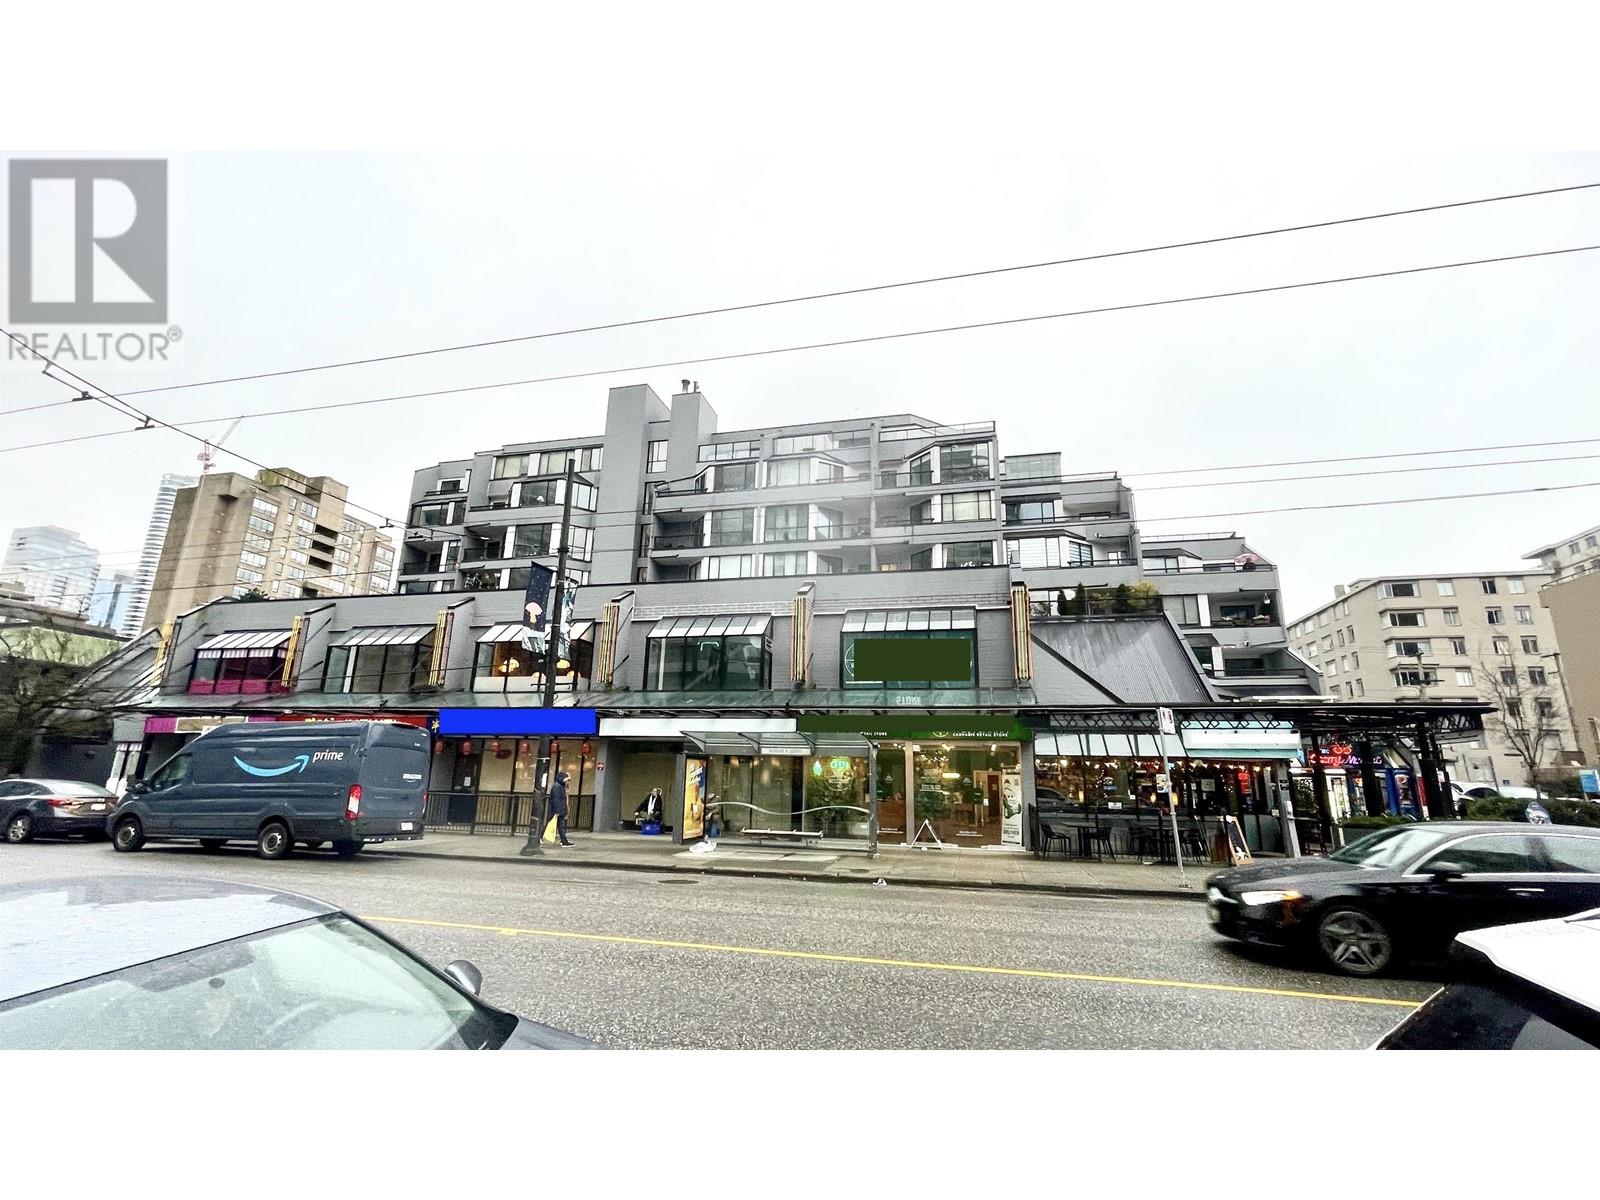 For sale: 1280 ROBSON STREET, Vancouver, British Columbia V6E1C1